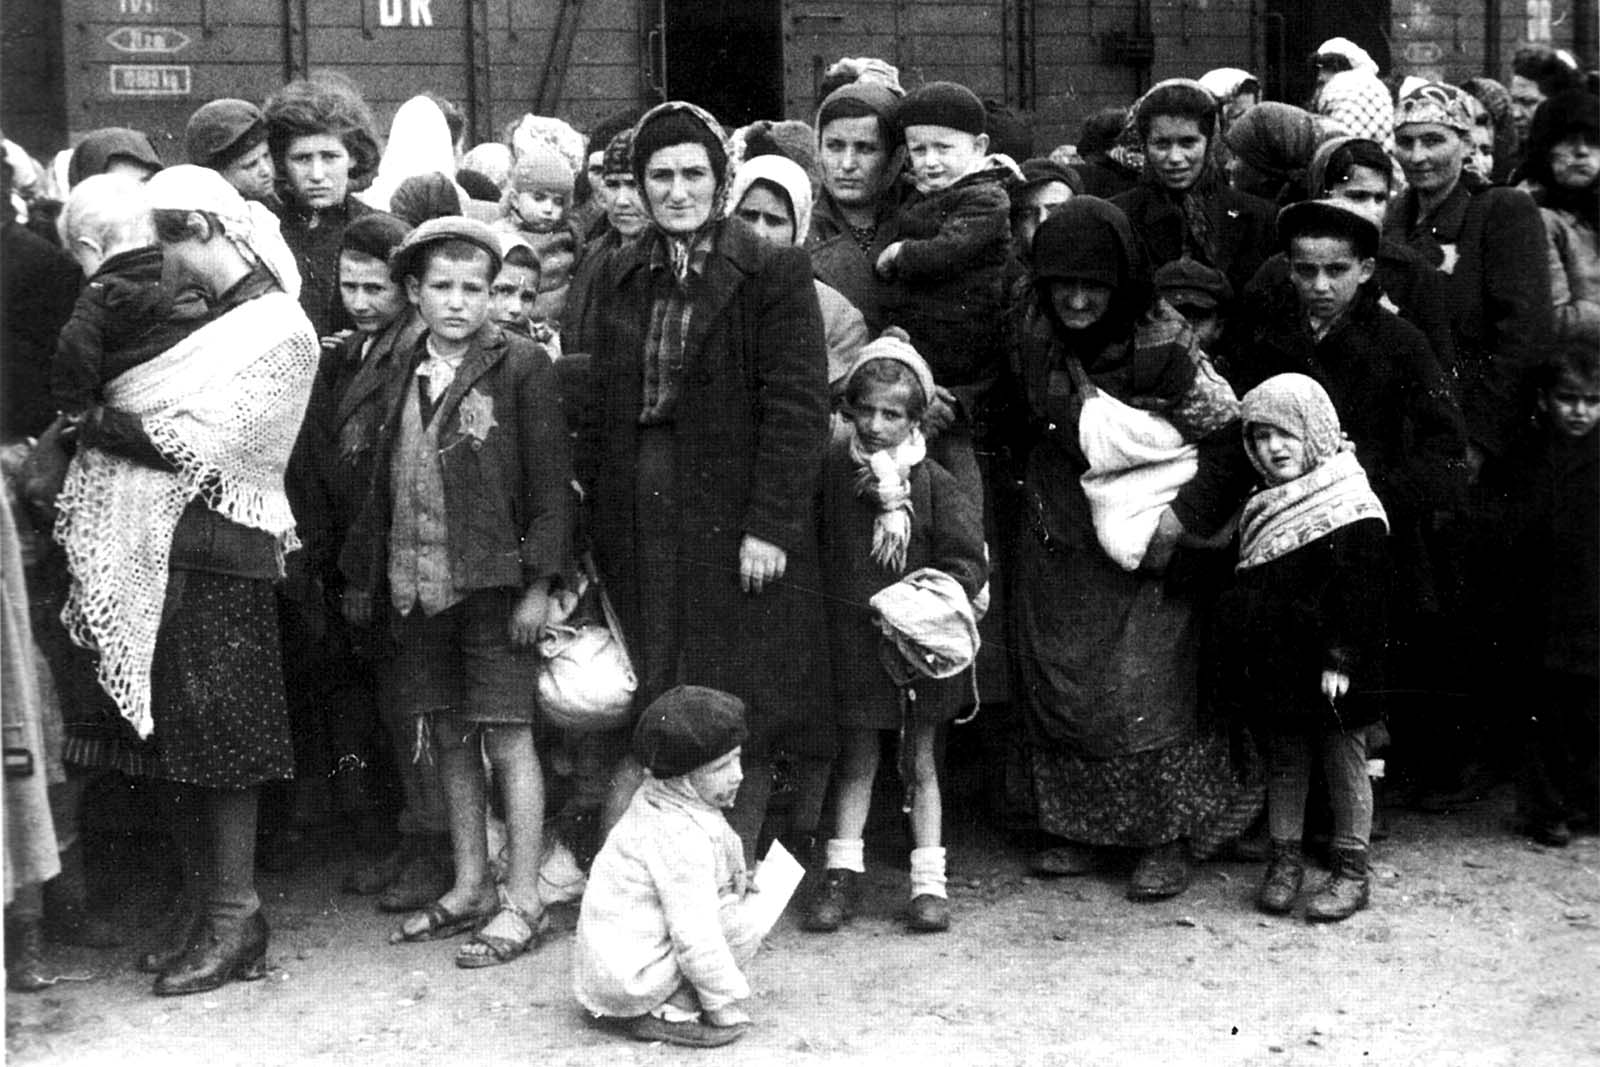 In the summer of 1944, a group of Jews from Hungary arrived on the platform of the Auschwitz extermination camp (Photo: Wikimedia).